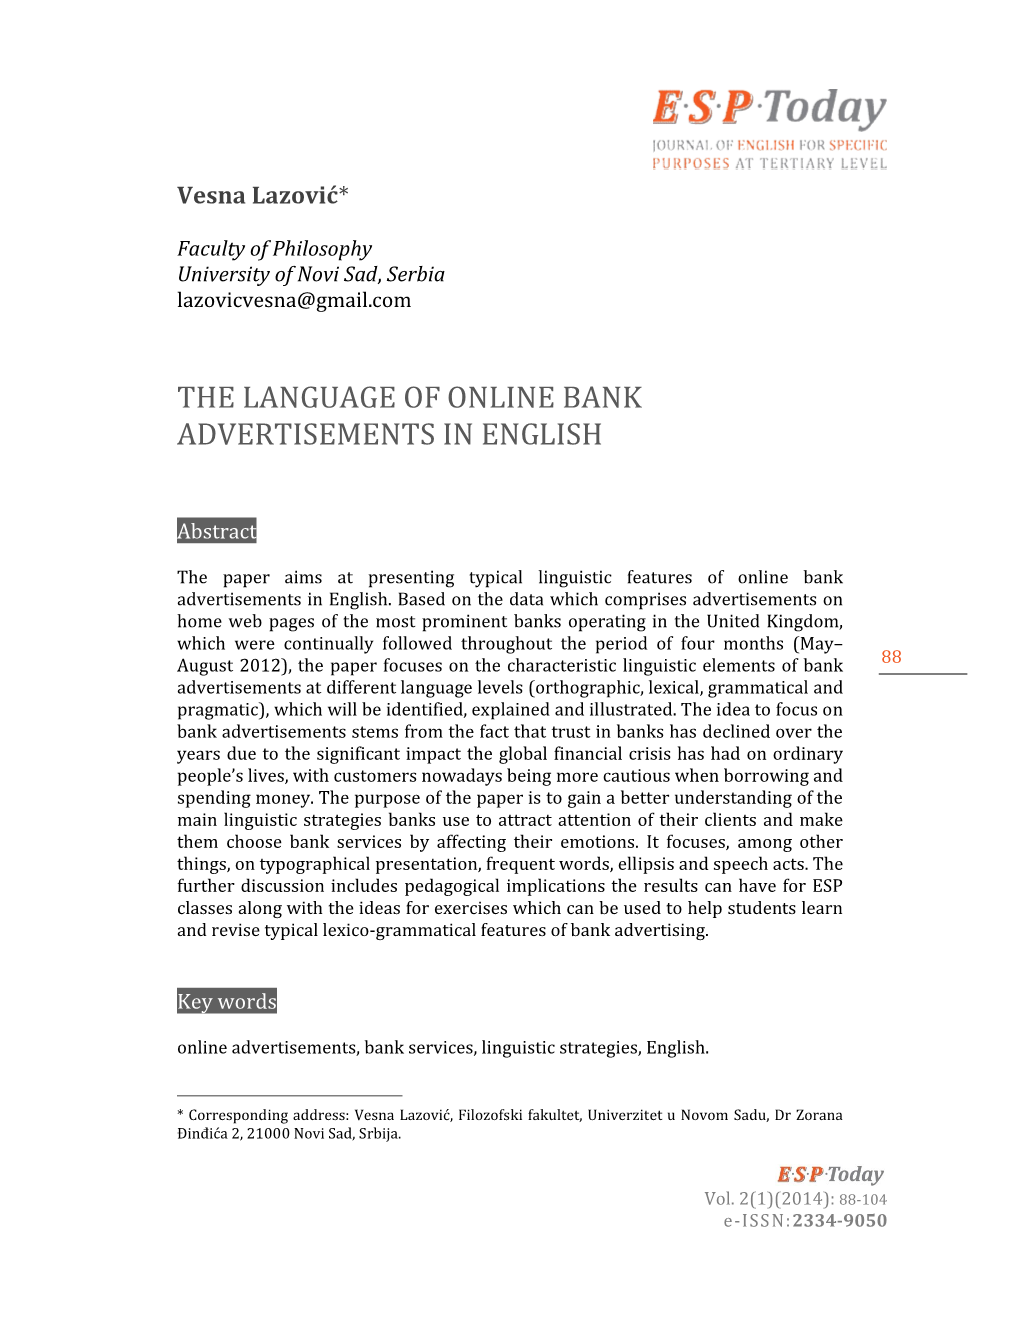 The Language of Online Bank Advertisements in English